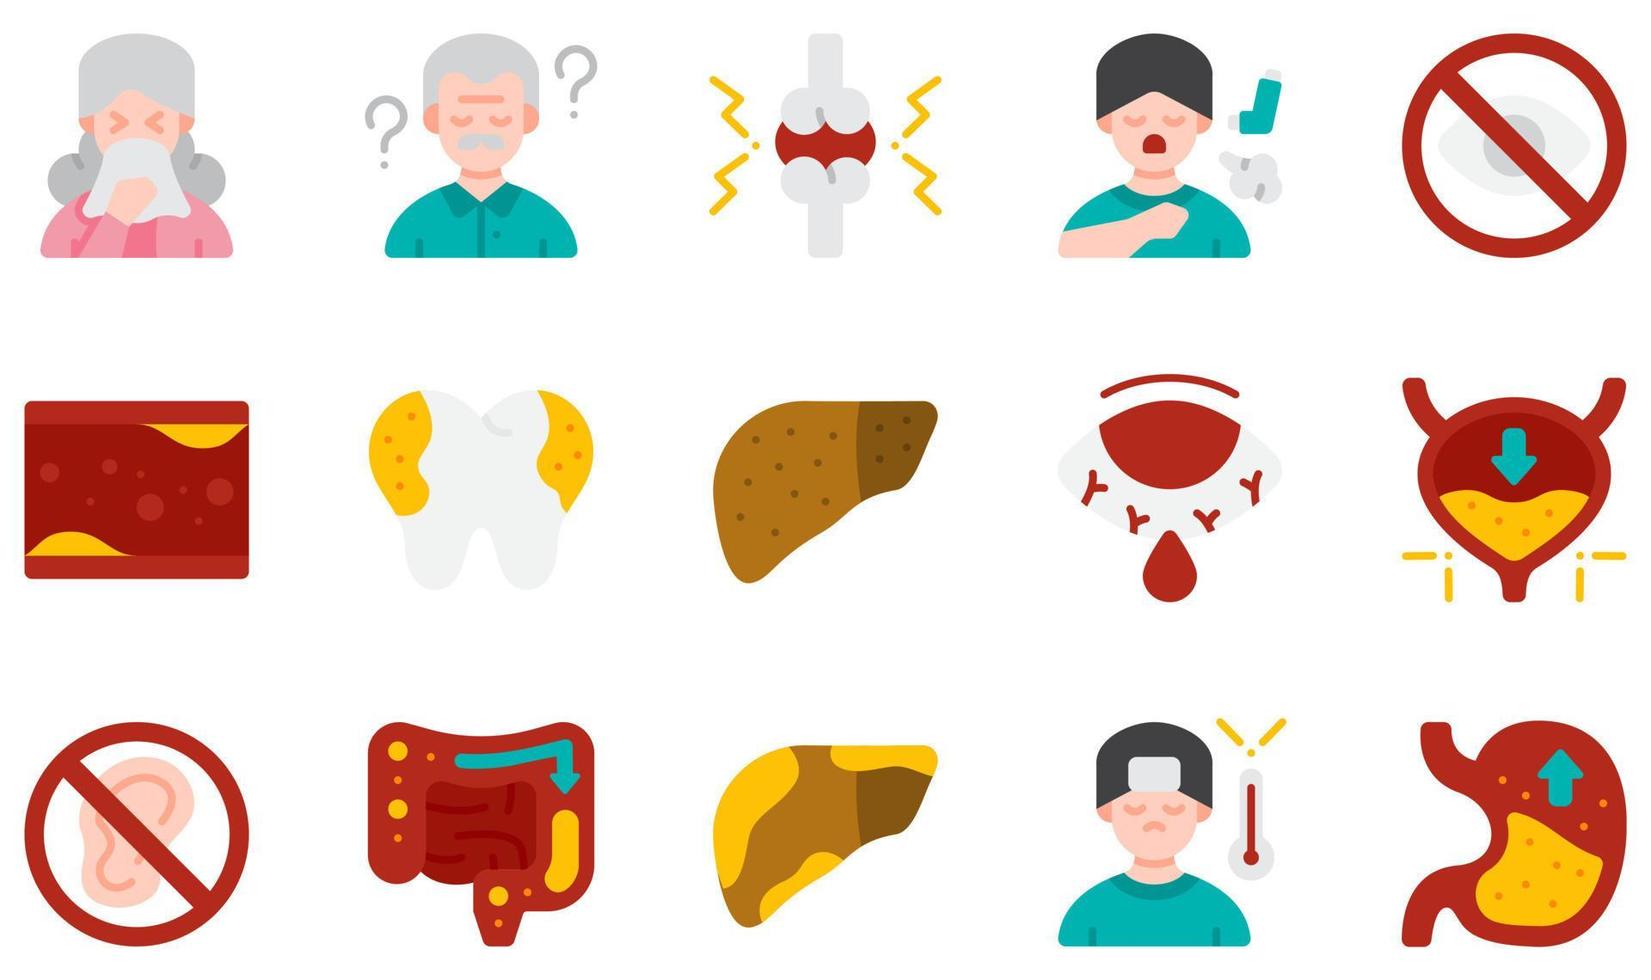 Set of Vector Icons Related to Diseases. Contains such Icons as Allergy, Alzheimer, Arthritis, Asthma, Blindness, Cholesterol and more.